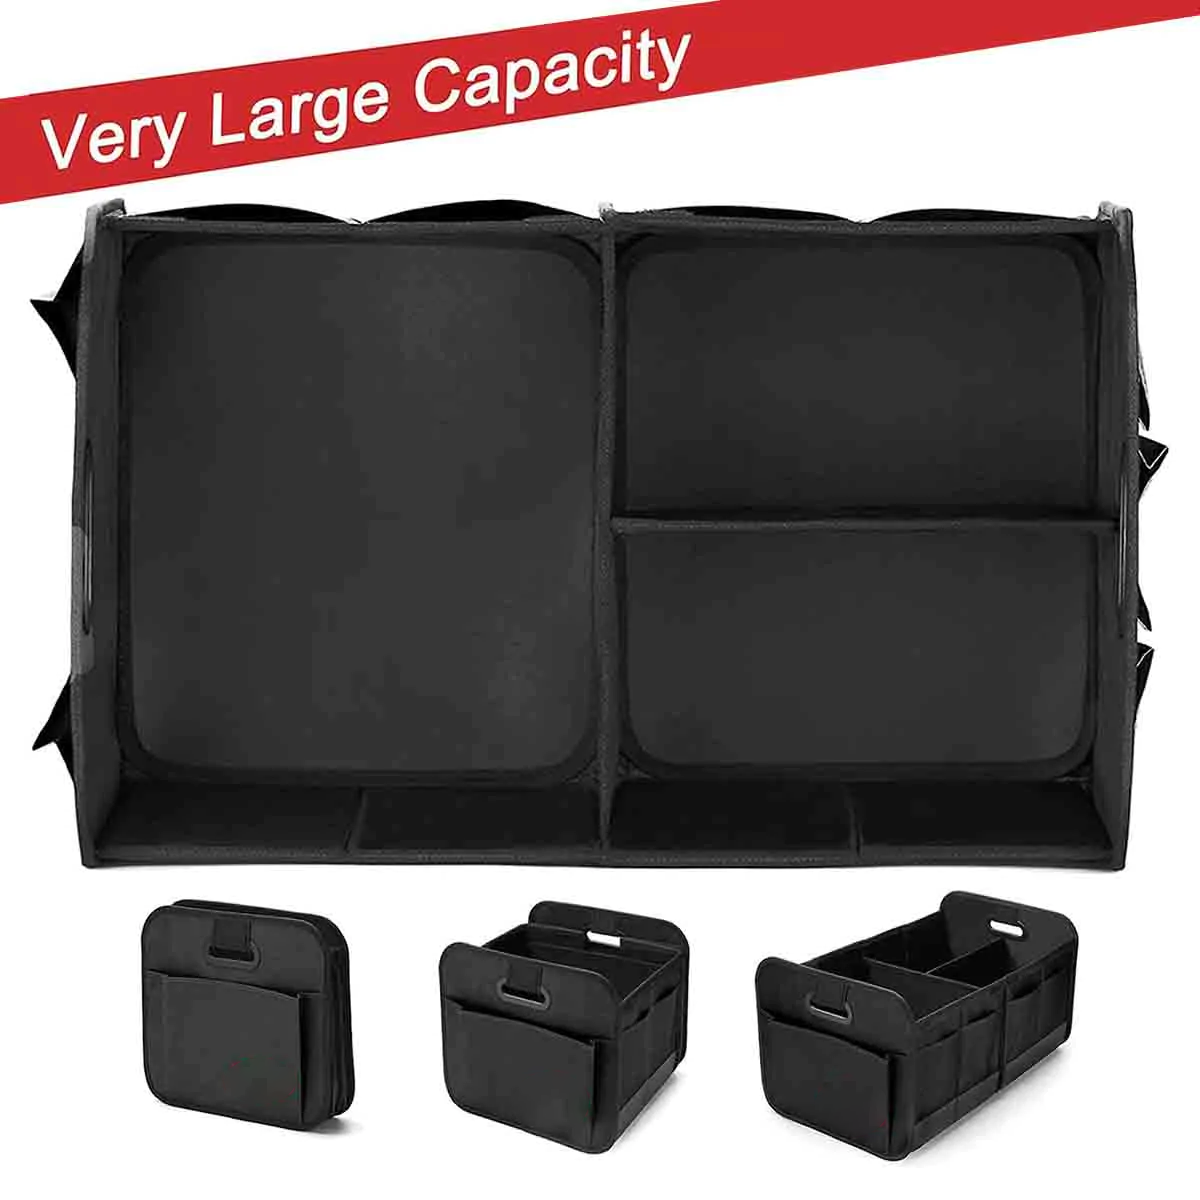 Custom Text For Car Trunk Organizer Storage, Compatible with All Cars, Reinforced Handles, Collapsible Multi, Compartment Car Organizers, Foldable and Waterproof, 600D Oxford Polyester JG12995